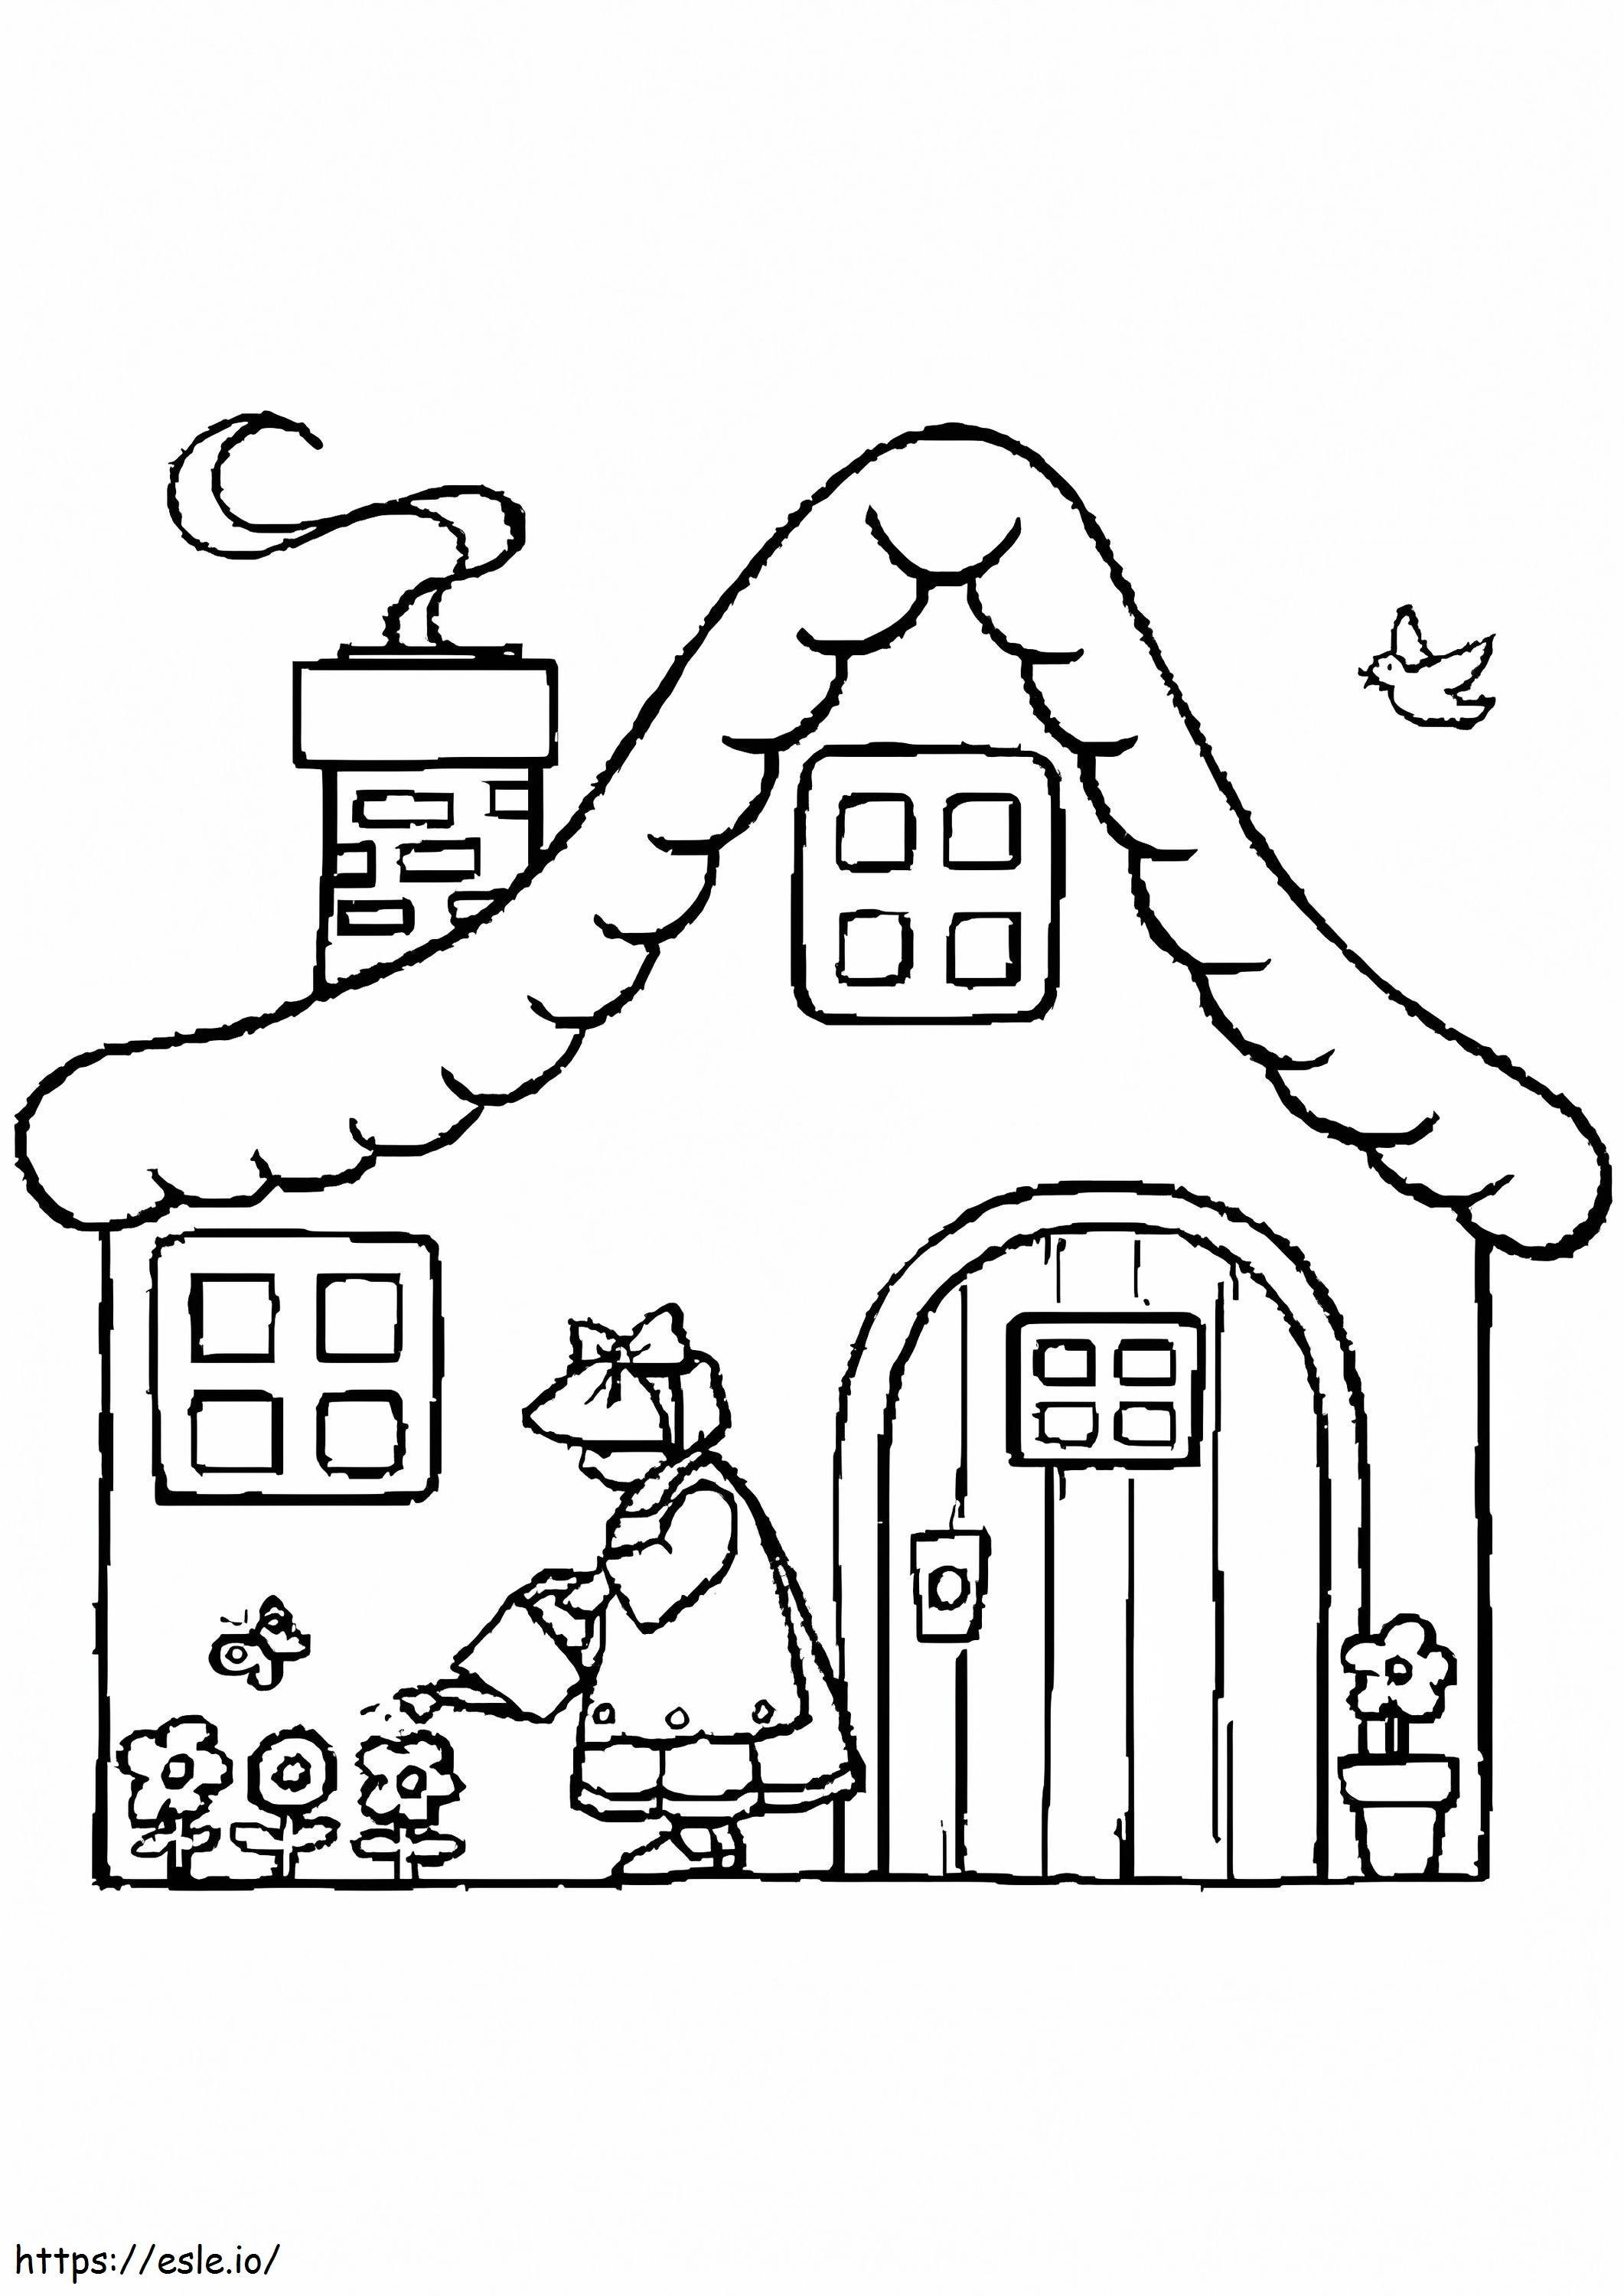 House With Fireplace coloring page